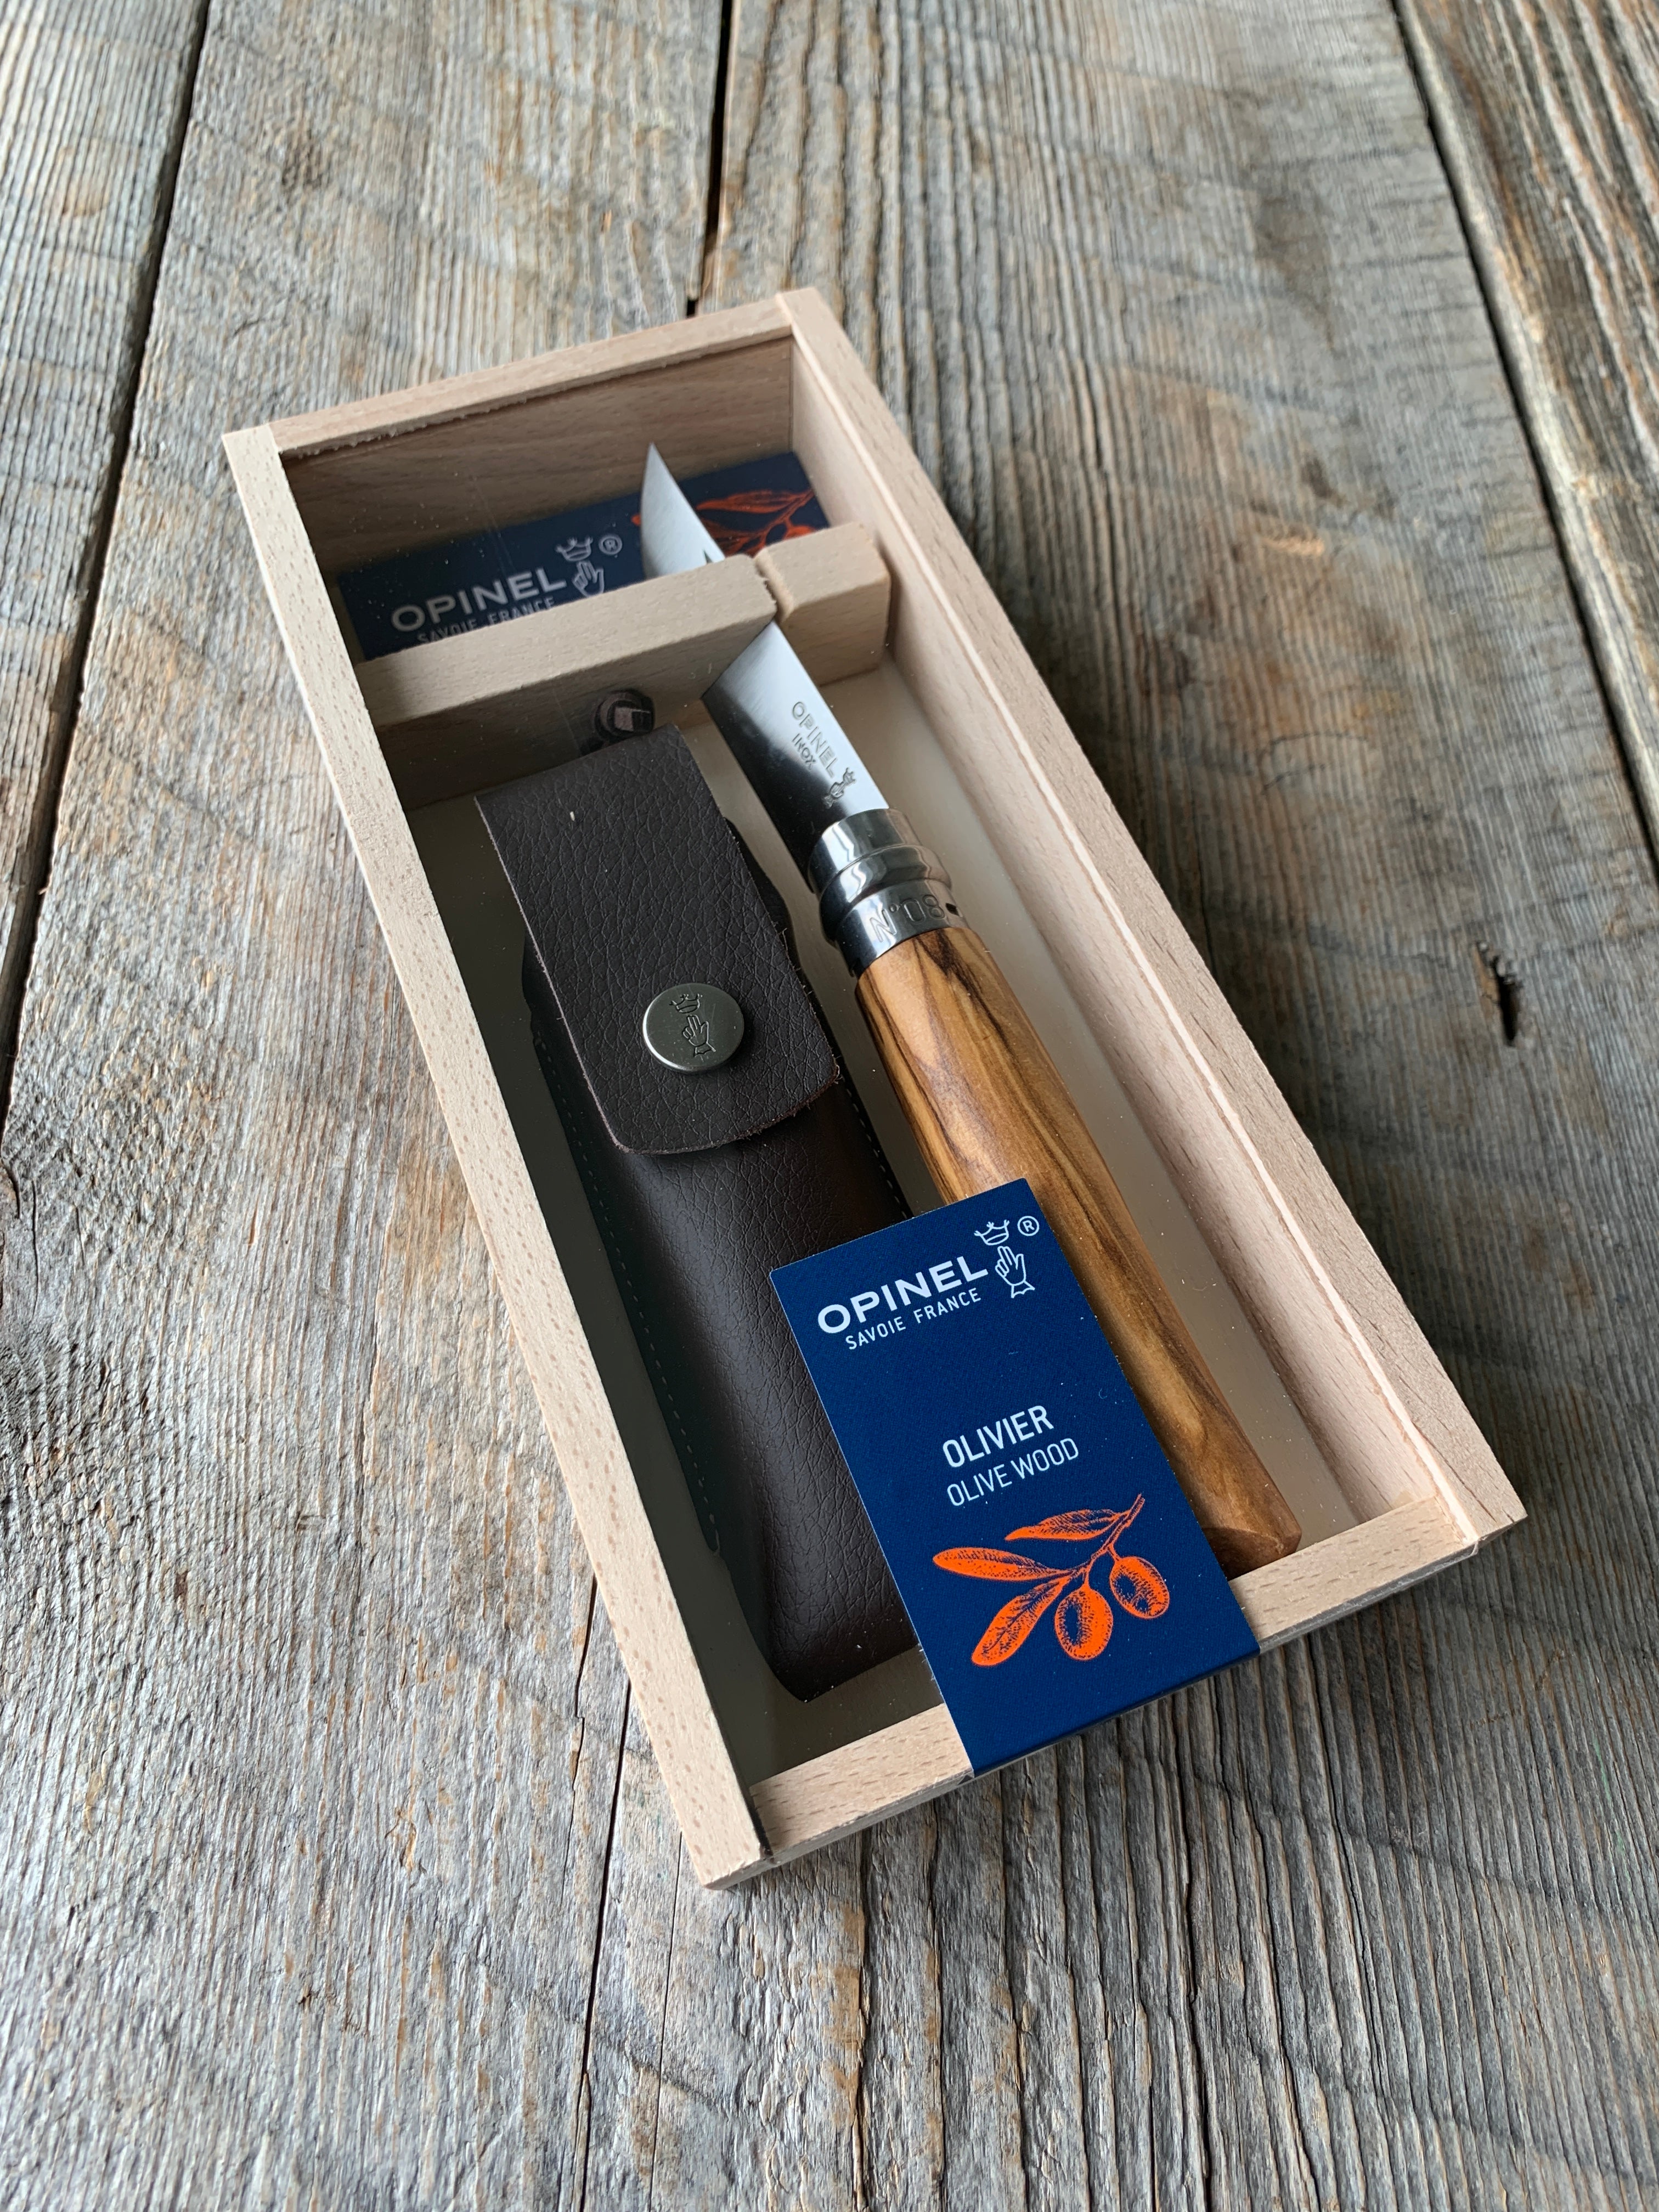 Opinel Wooden Gift Box #8 Olive